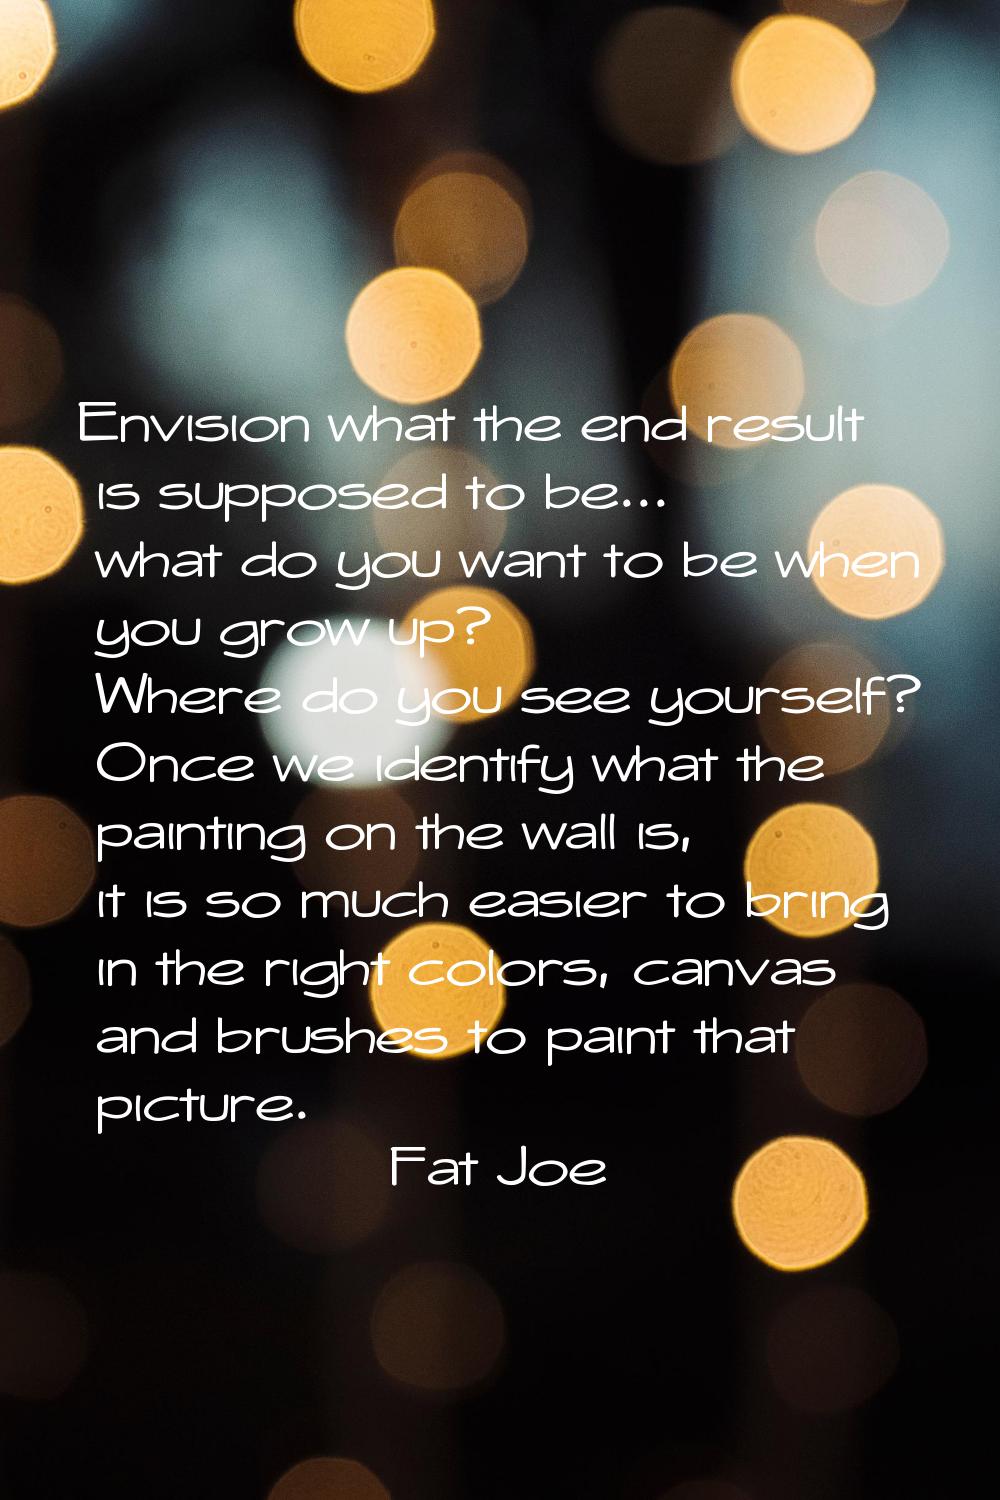 Envision what the end result is supposed to be... what do you want to be when you grow up? Where do